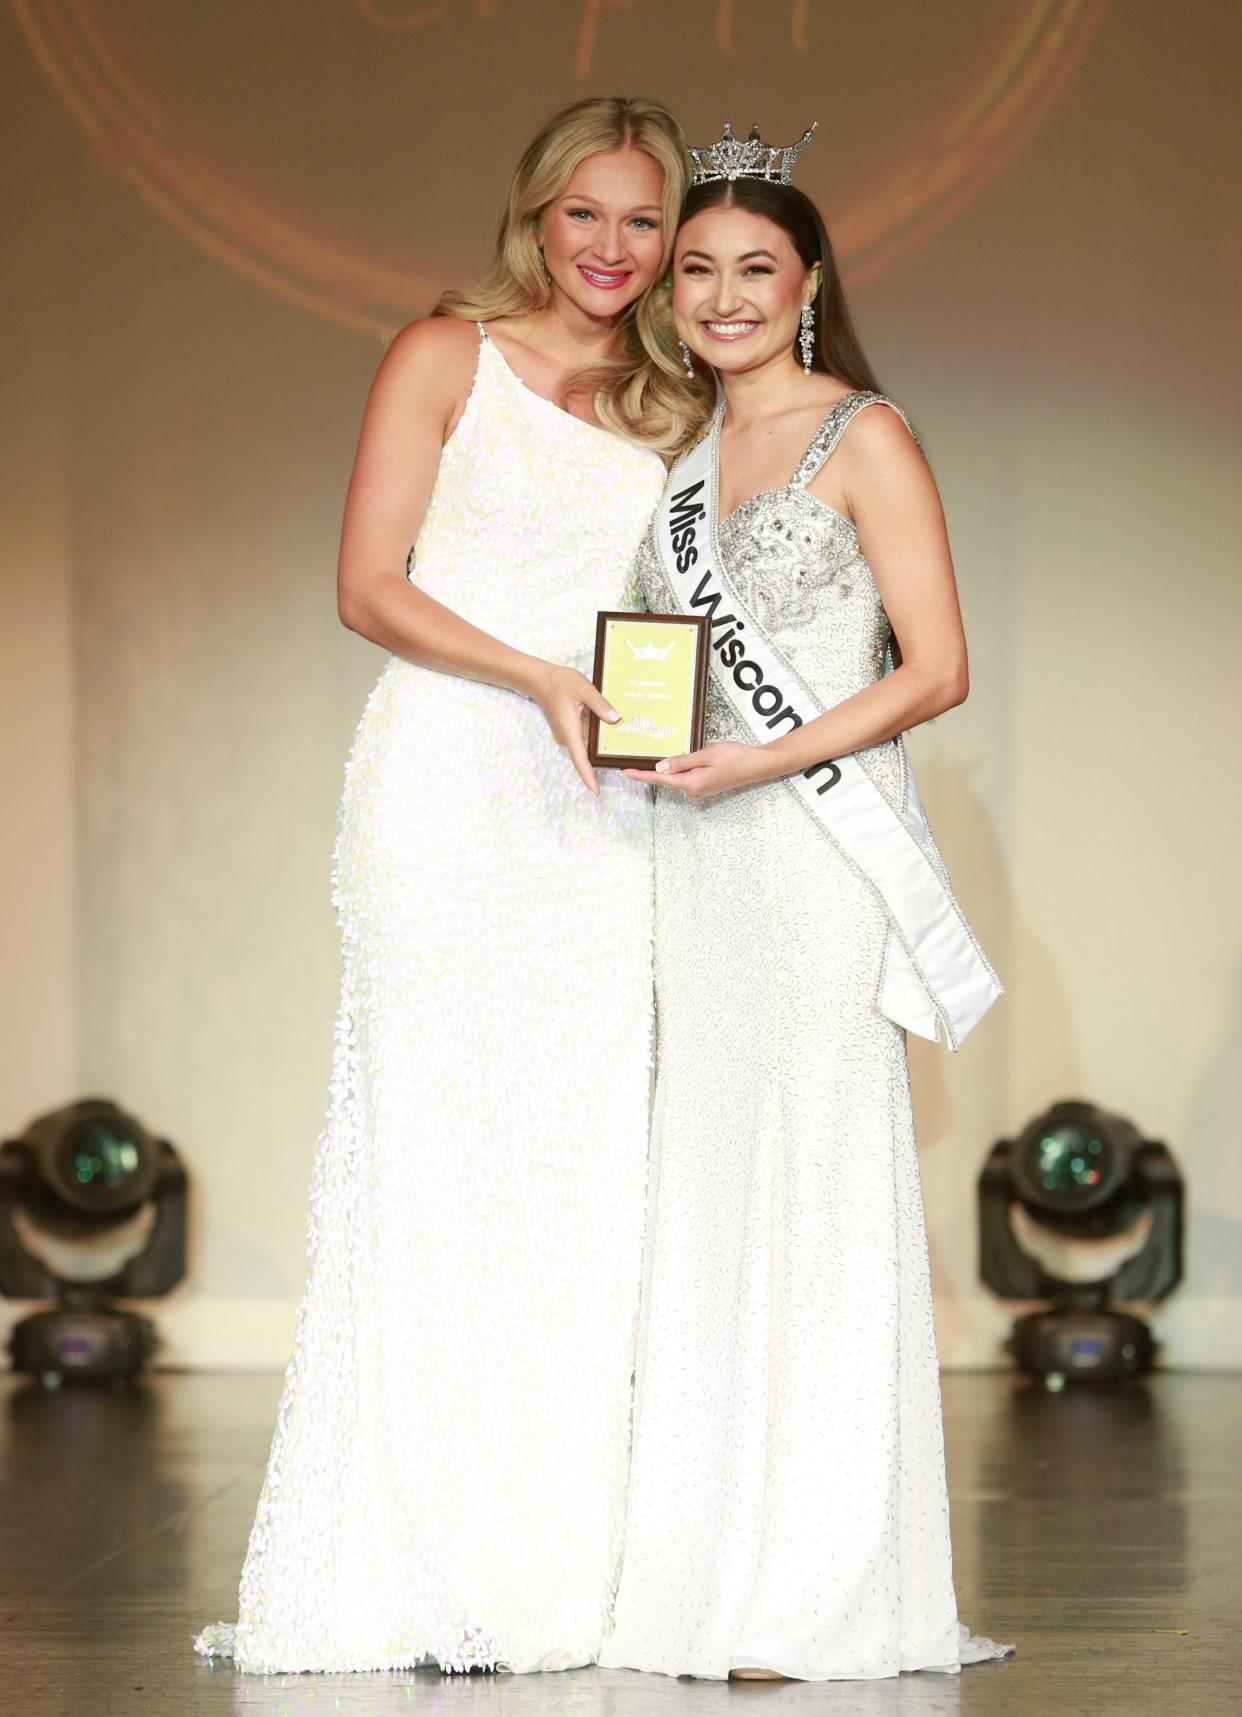 Miss Northern Lights Mandi Genord (left) receiving her preliminary Talent Award from reigning Miss Wisconsin Lila Szyryj.